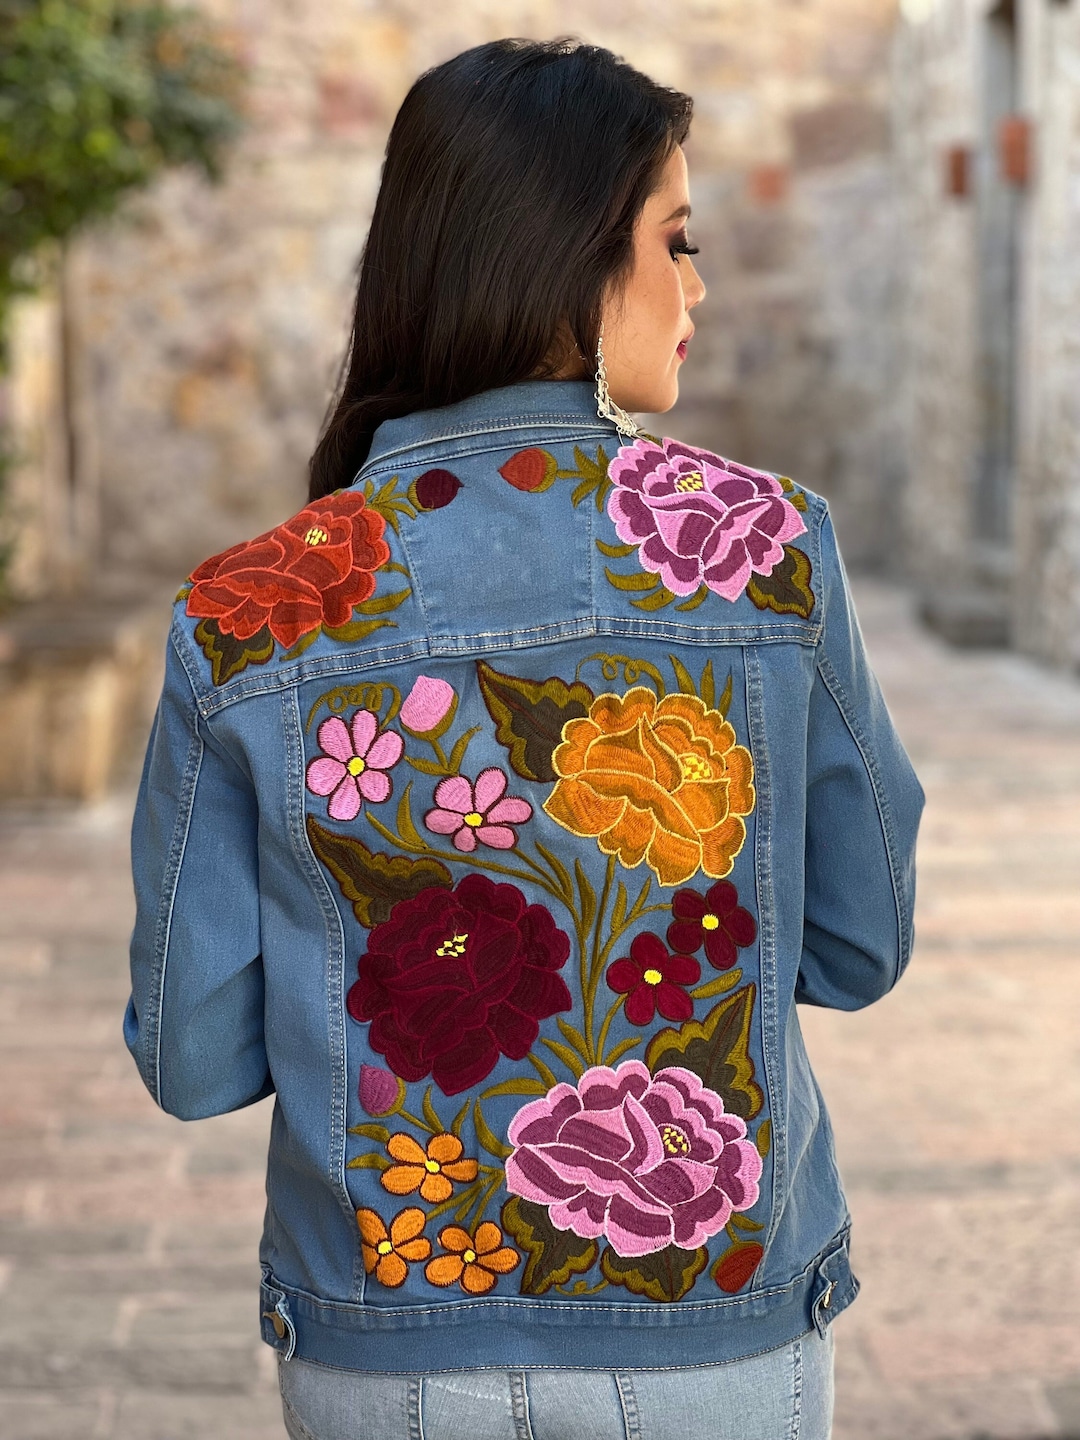 Mexican Floral Embroidered Jeans Jacket. Mexican Artisanal 